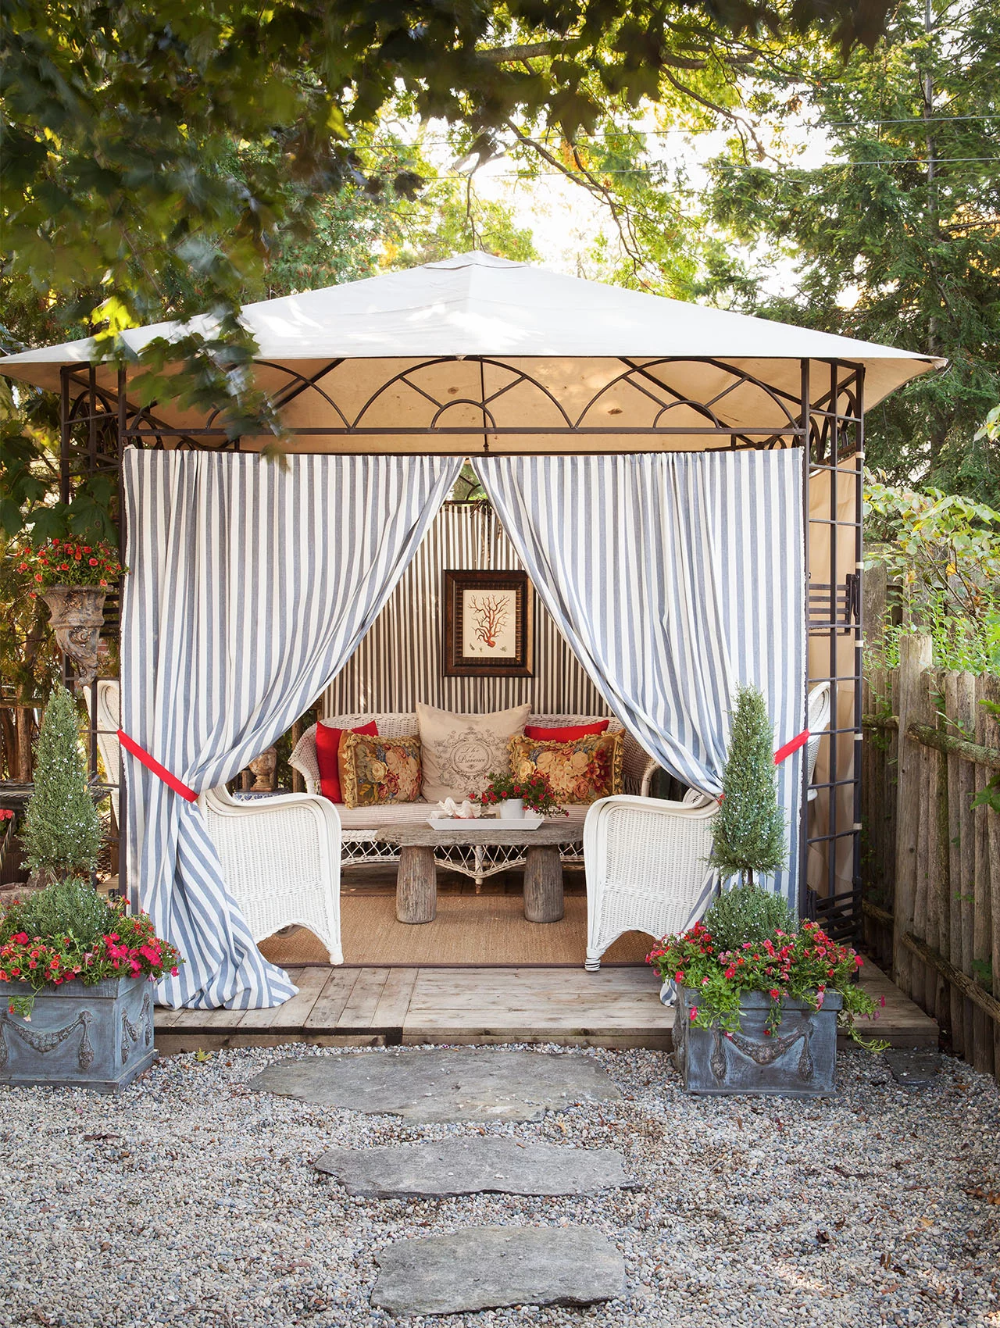 Creating an Outdoor Oasis with a Beautiful Patio Gazebo